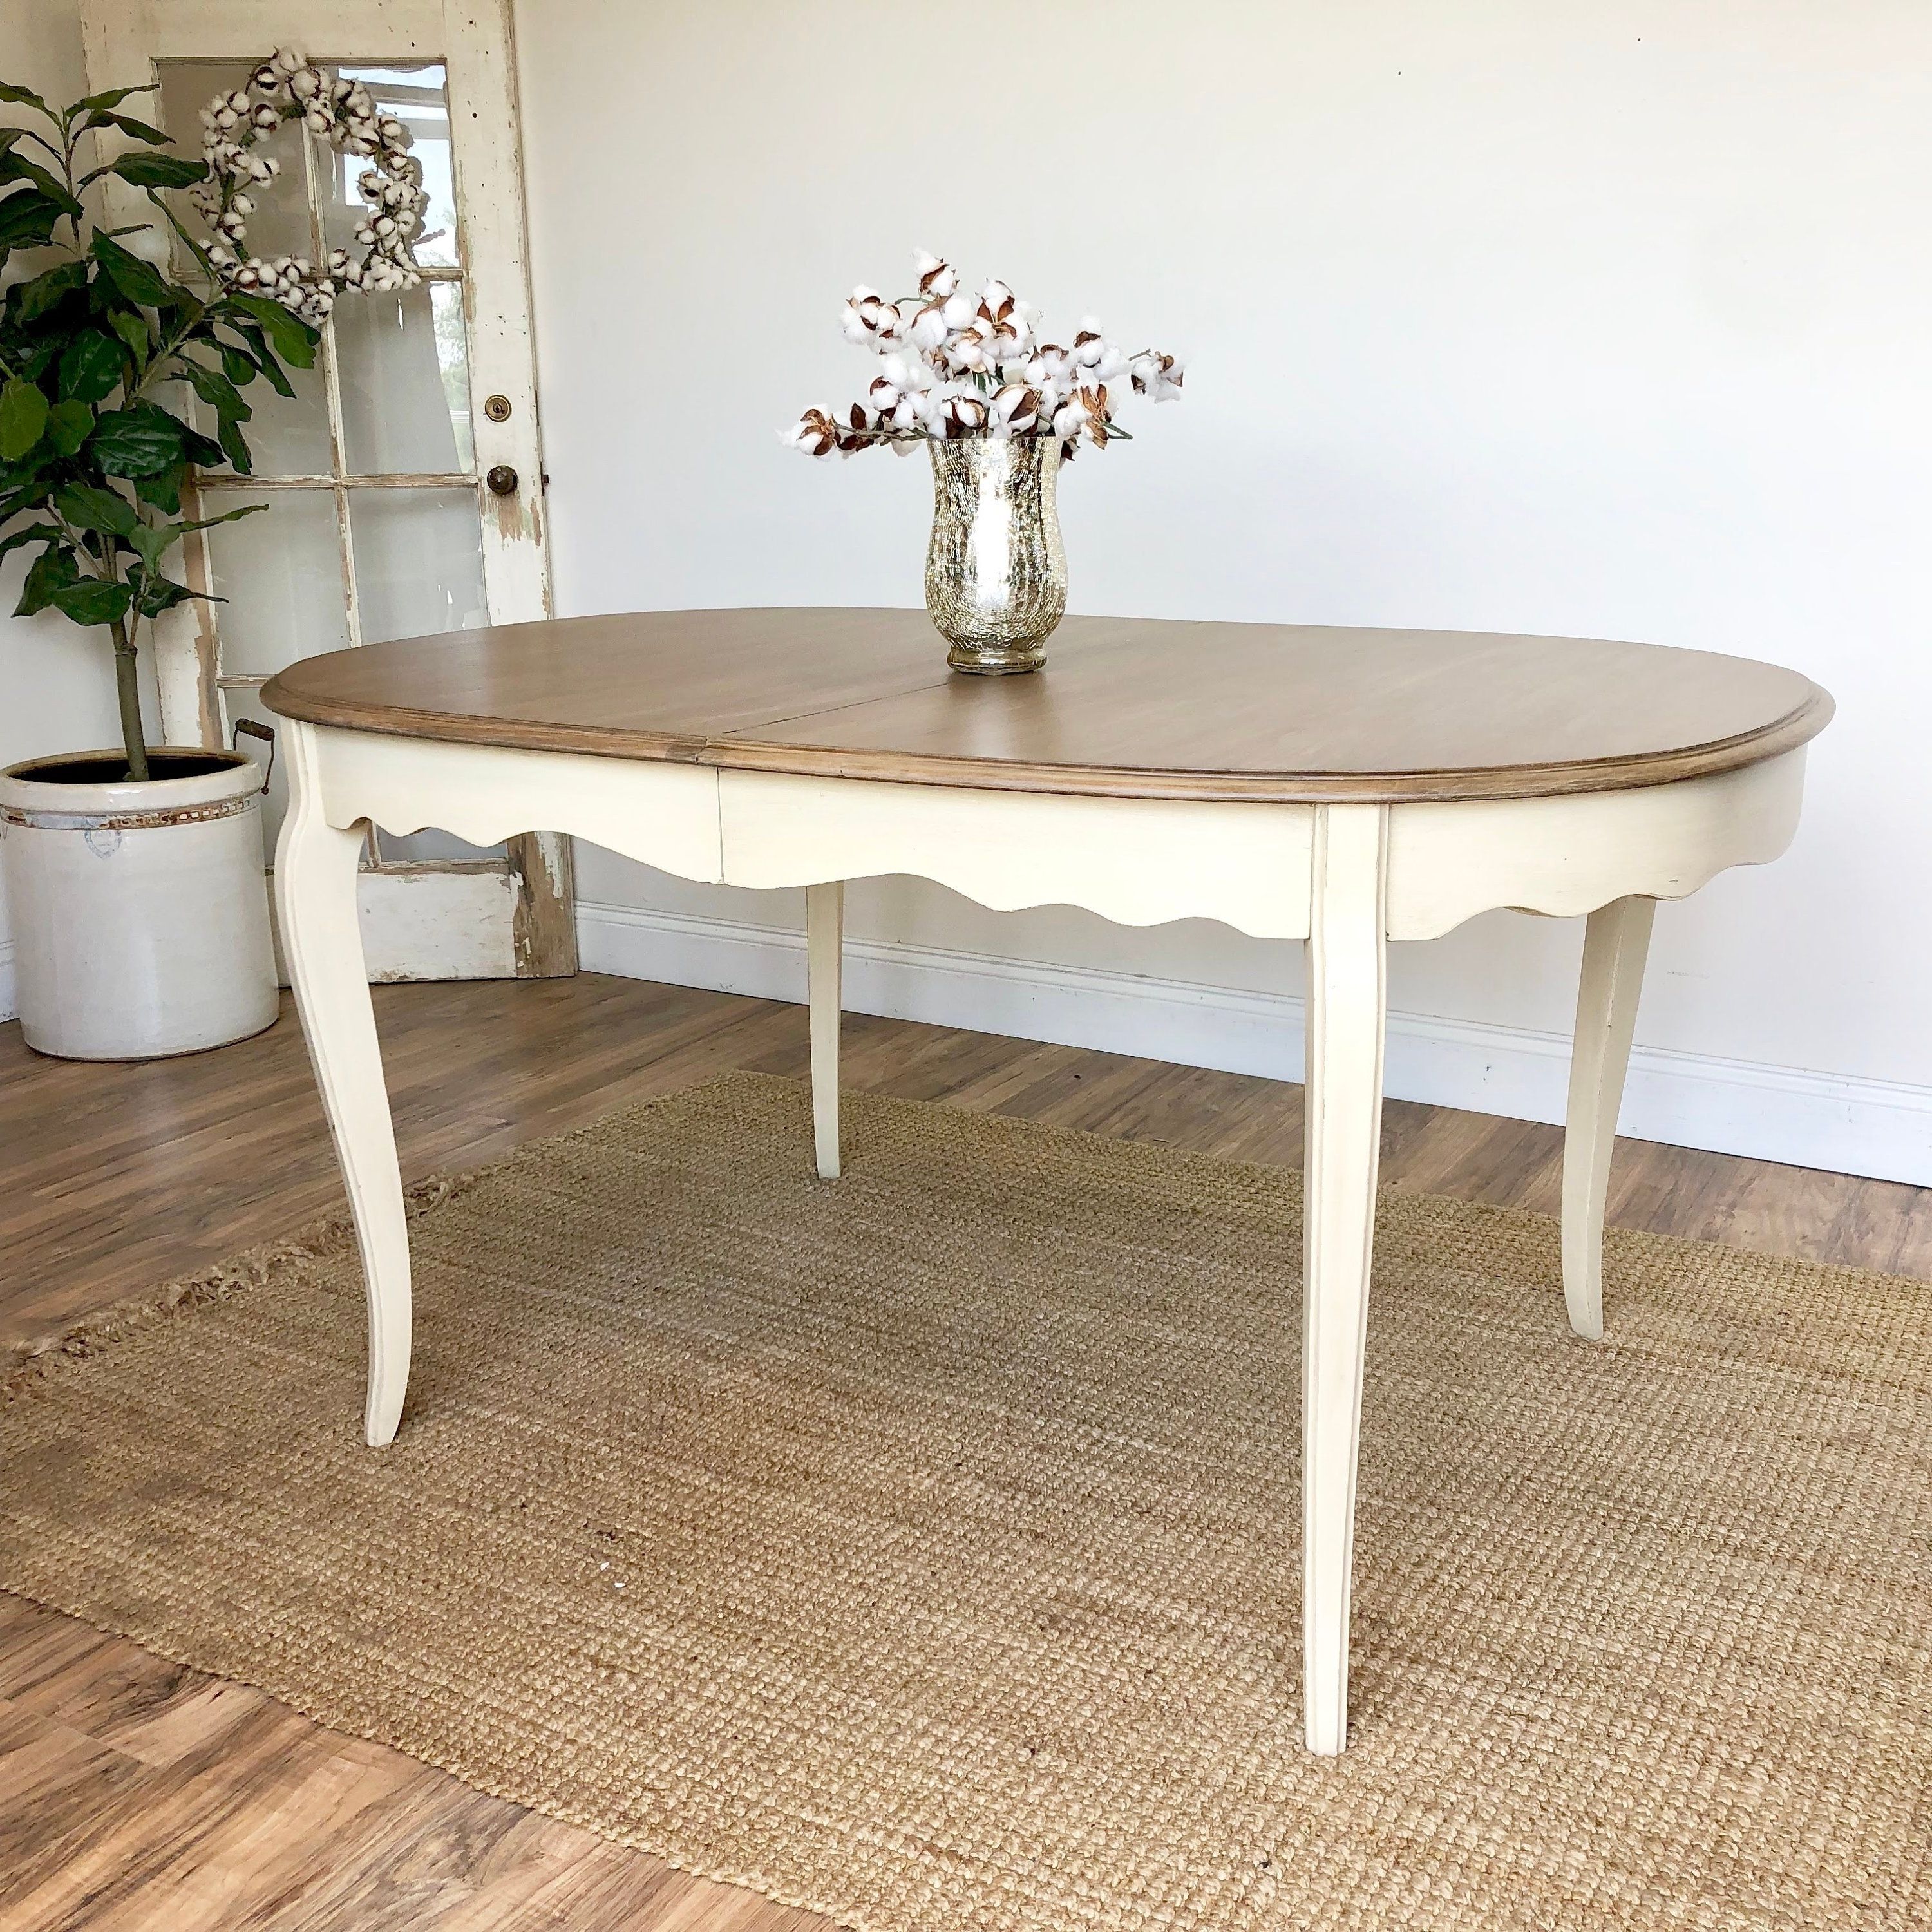 Best And Newest French Chic Dining Tables With Yellow French Country Dining Table – Shabby Chic Distressed Wood (View 23 of 25)